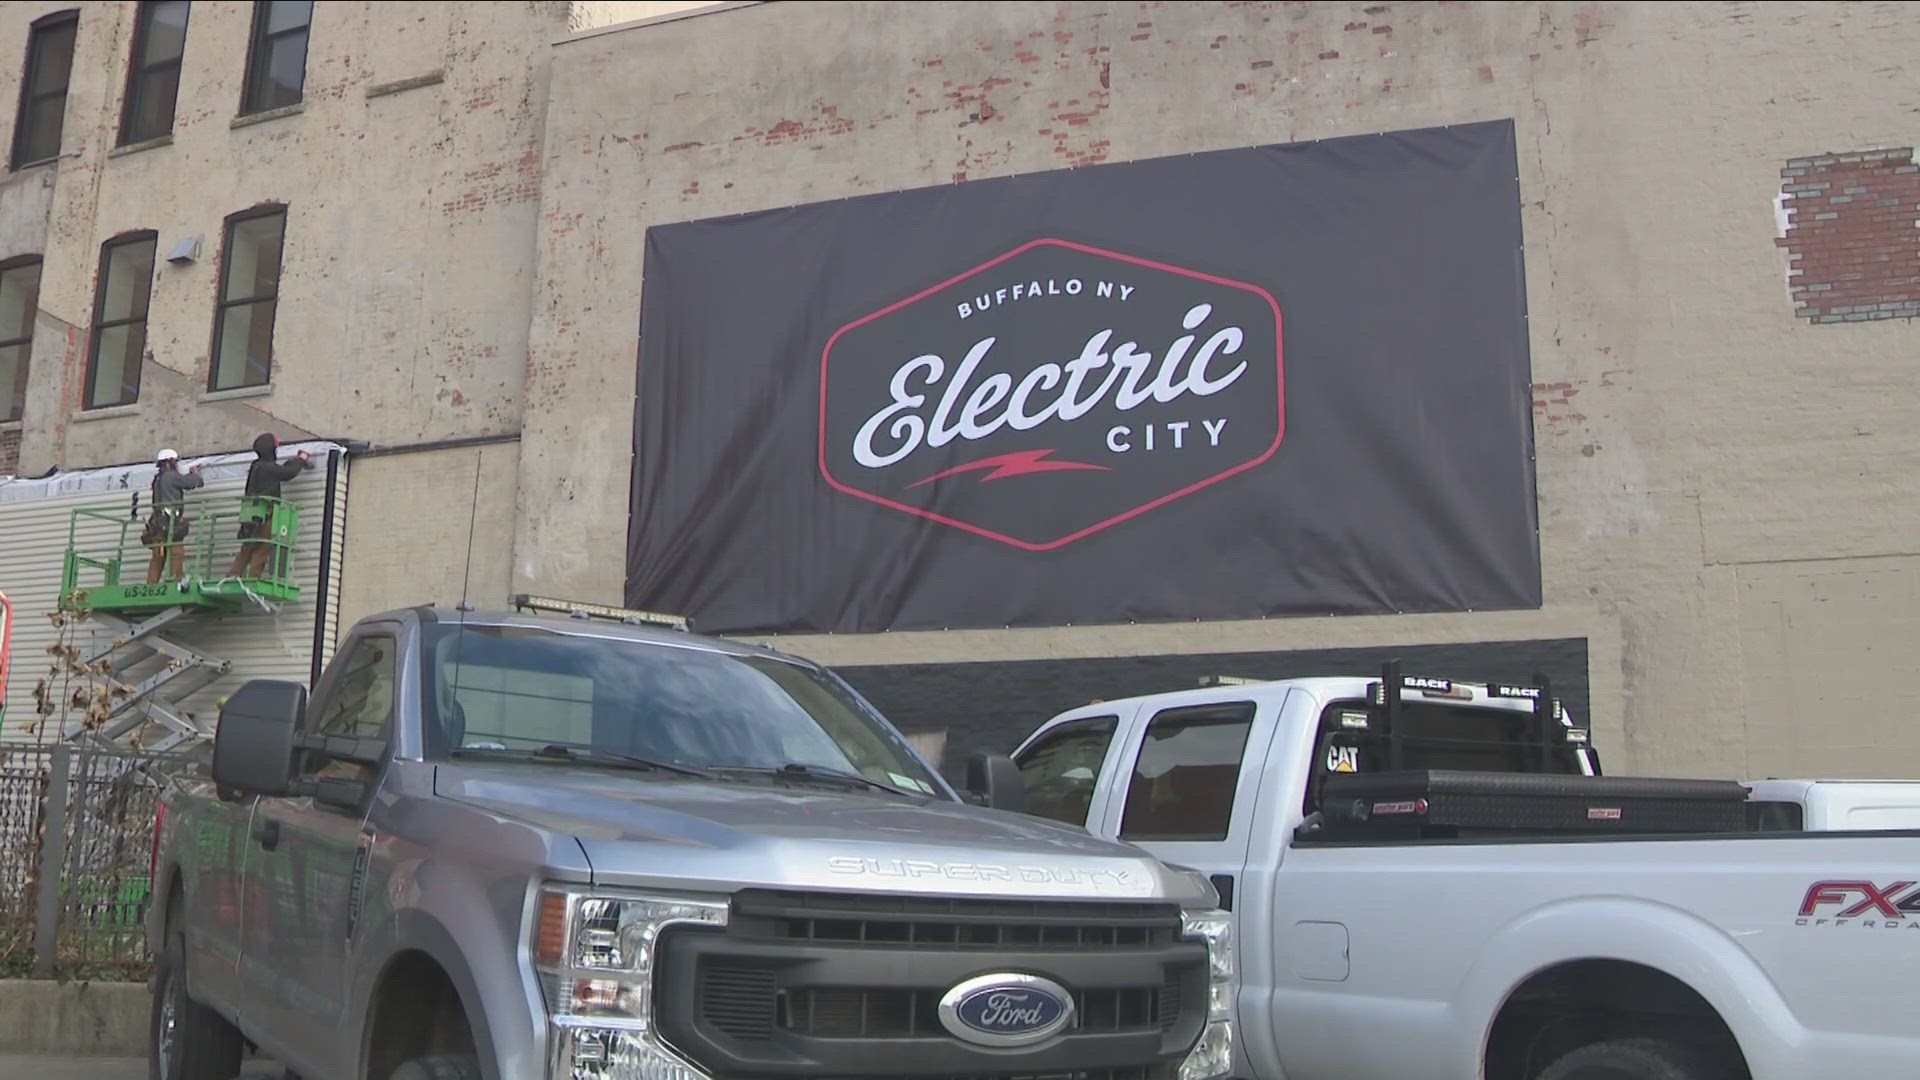 Electric City music venue opening in downtown Buffalo at the former Tralf site